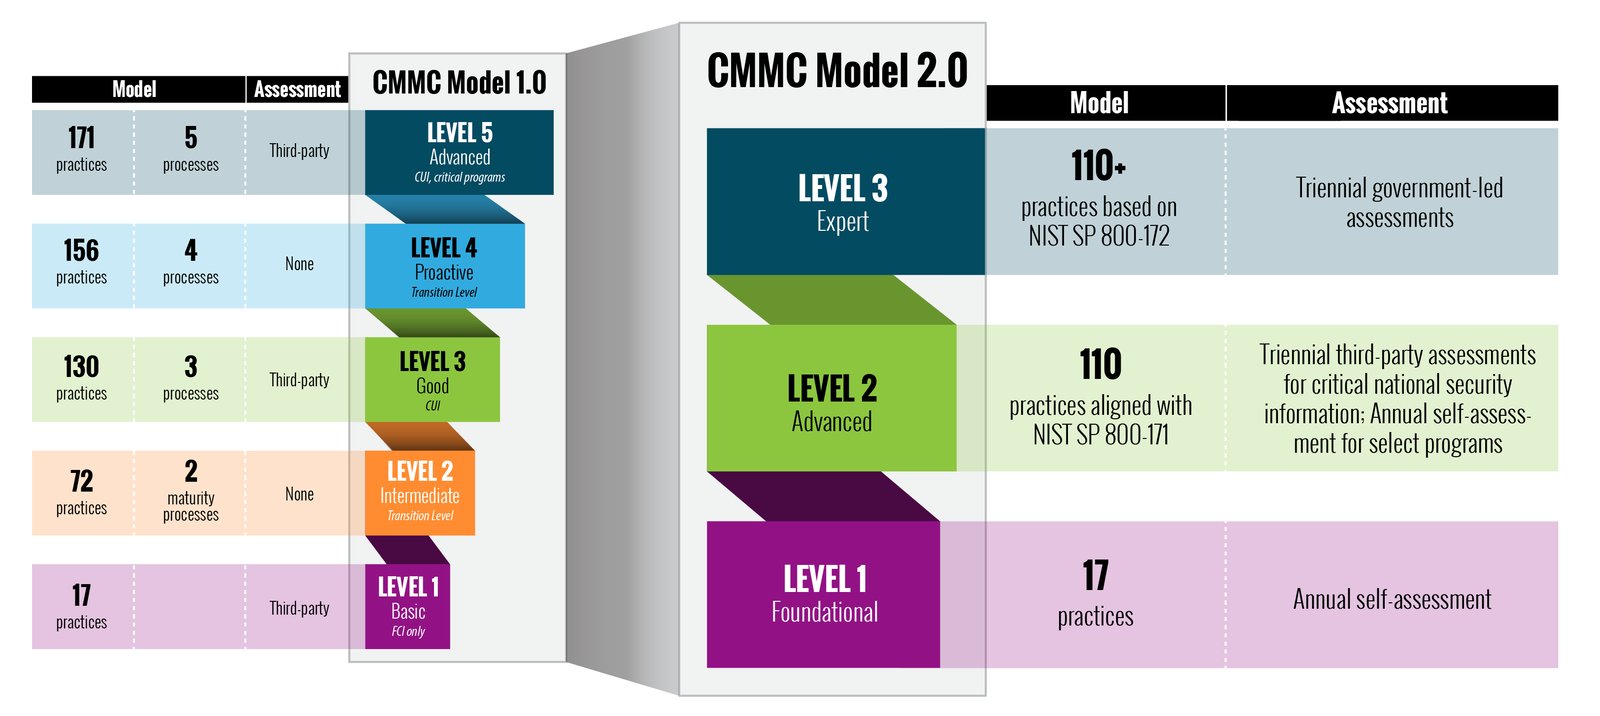 cmmc-2.0-levels-lgv3-ftp-today-secure-file-sharing